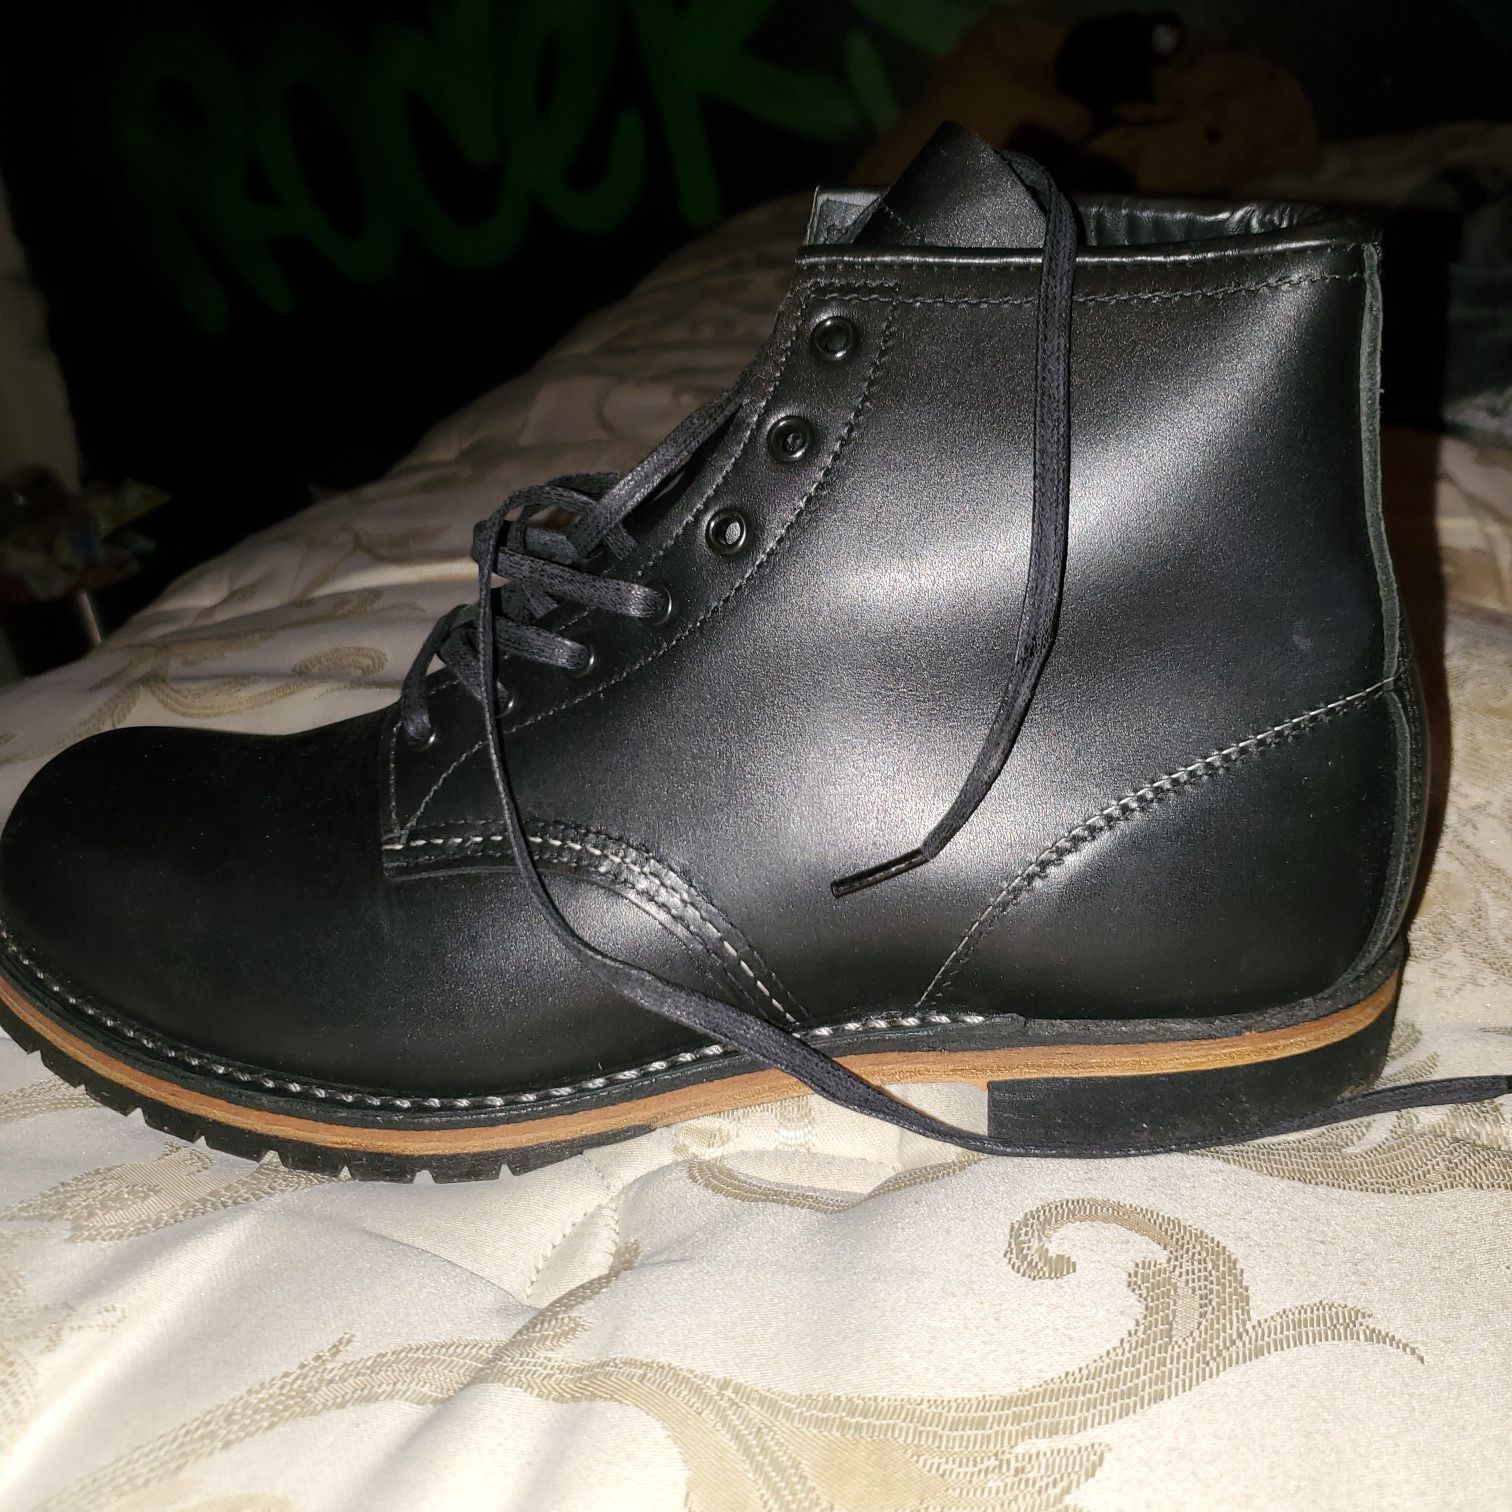 Red wing 9014 beckman blk featherson Leather brand new. Discontinued boot never available again size 10d